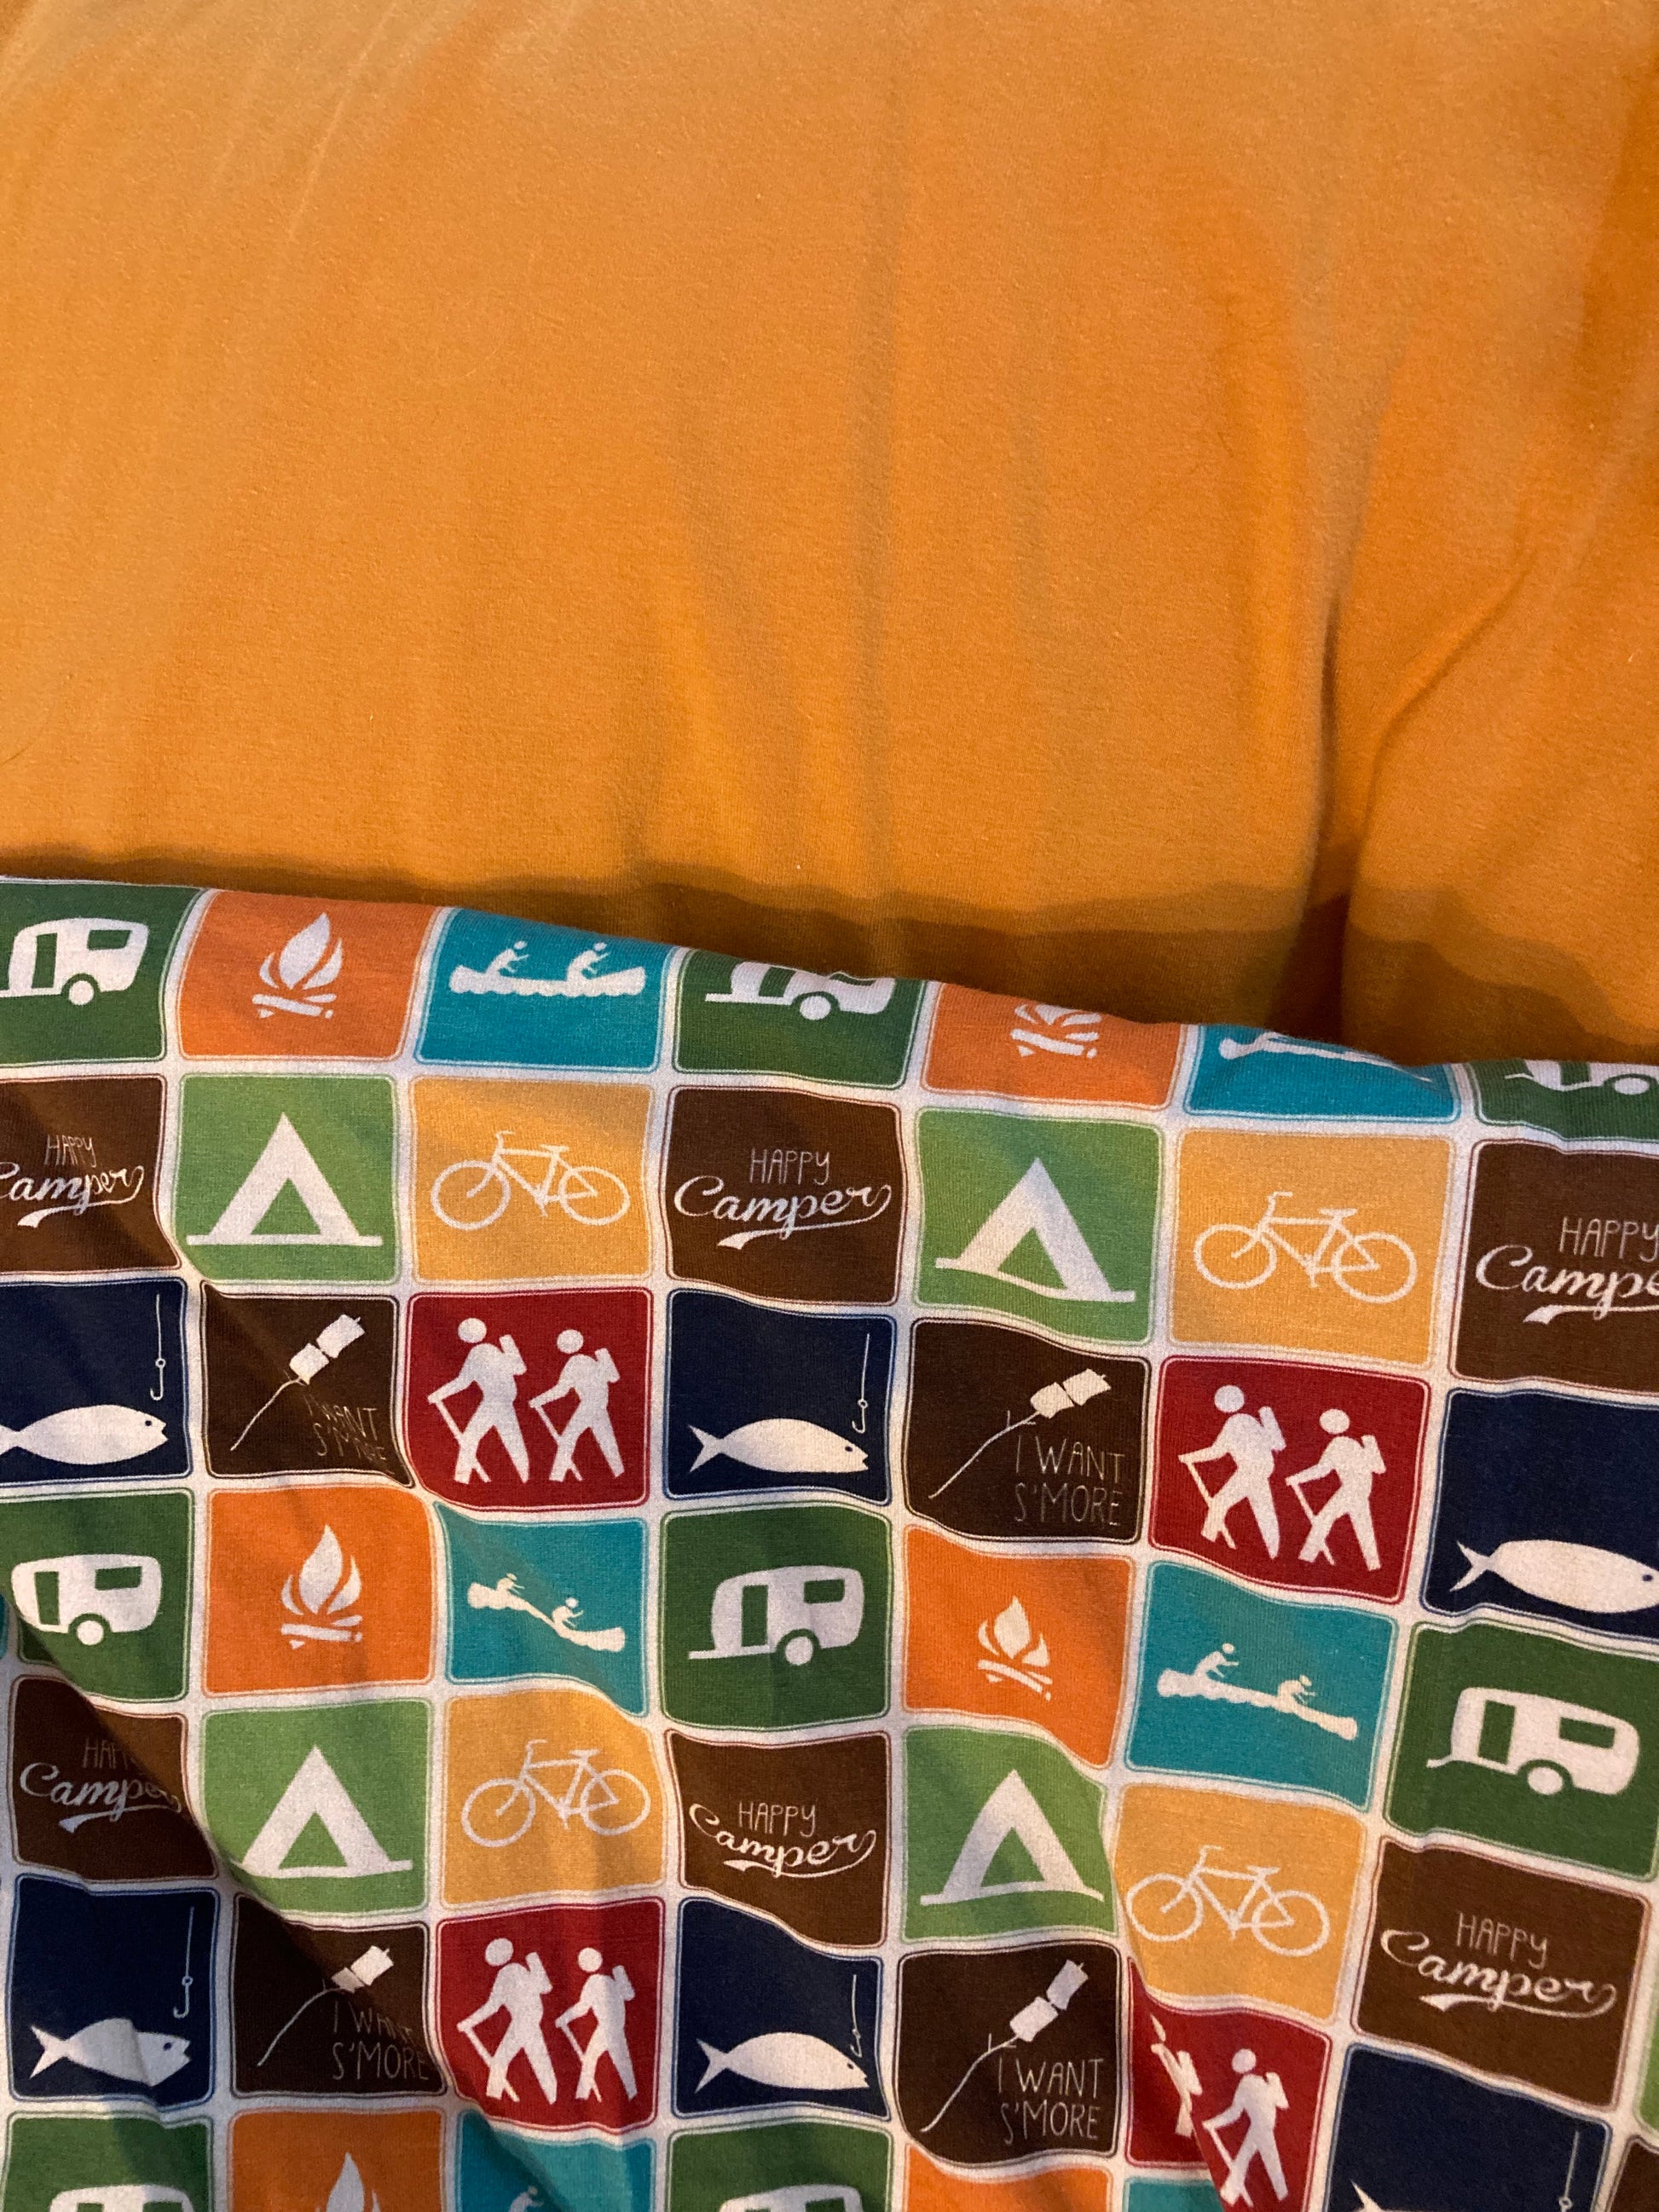 camping symbols fabric paired with mustard yellow.  Camping symbols include hikers, s'mores, bike, tent, camper, fishing, and Happy Camper text